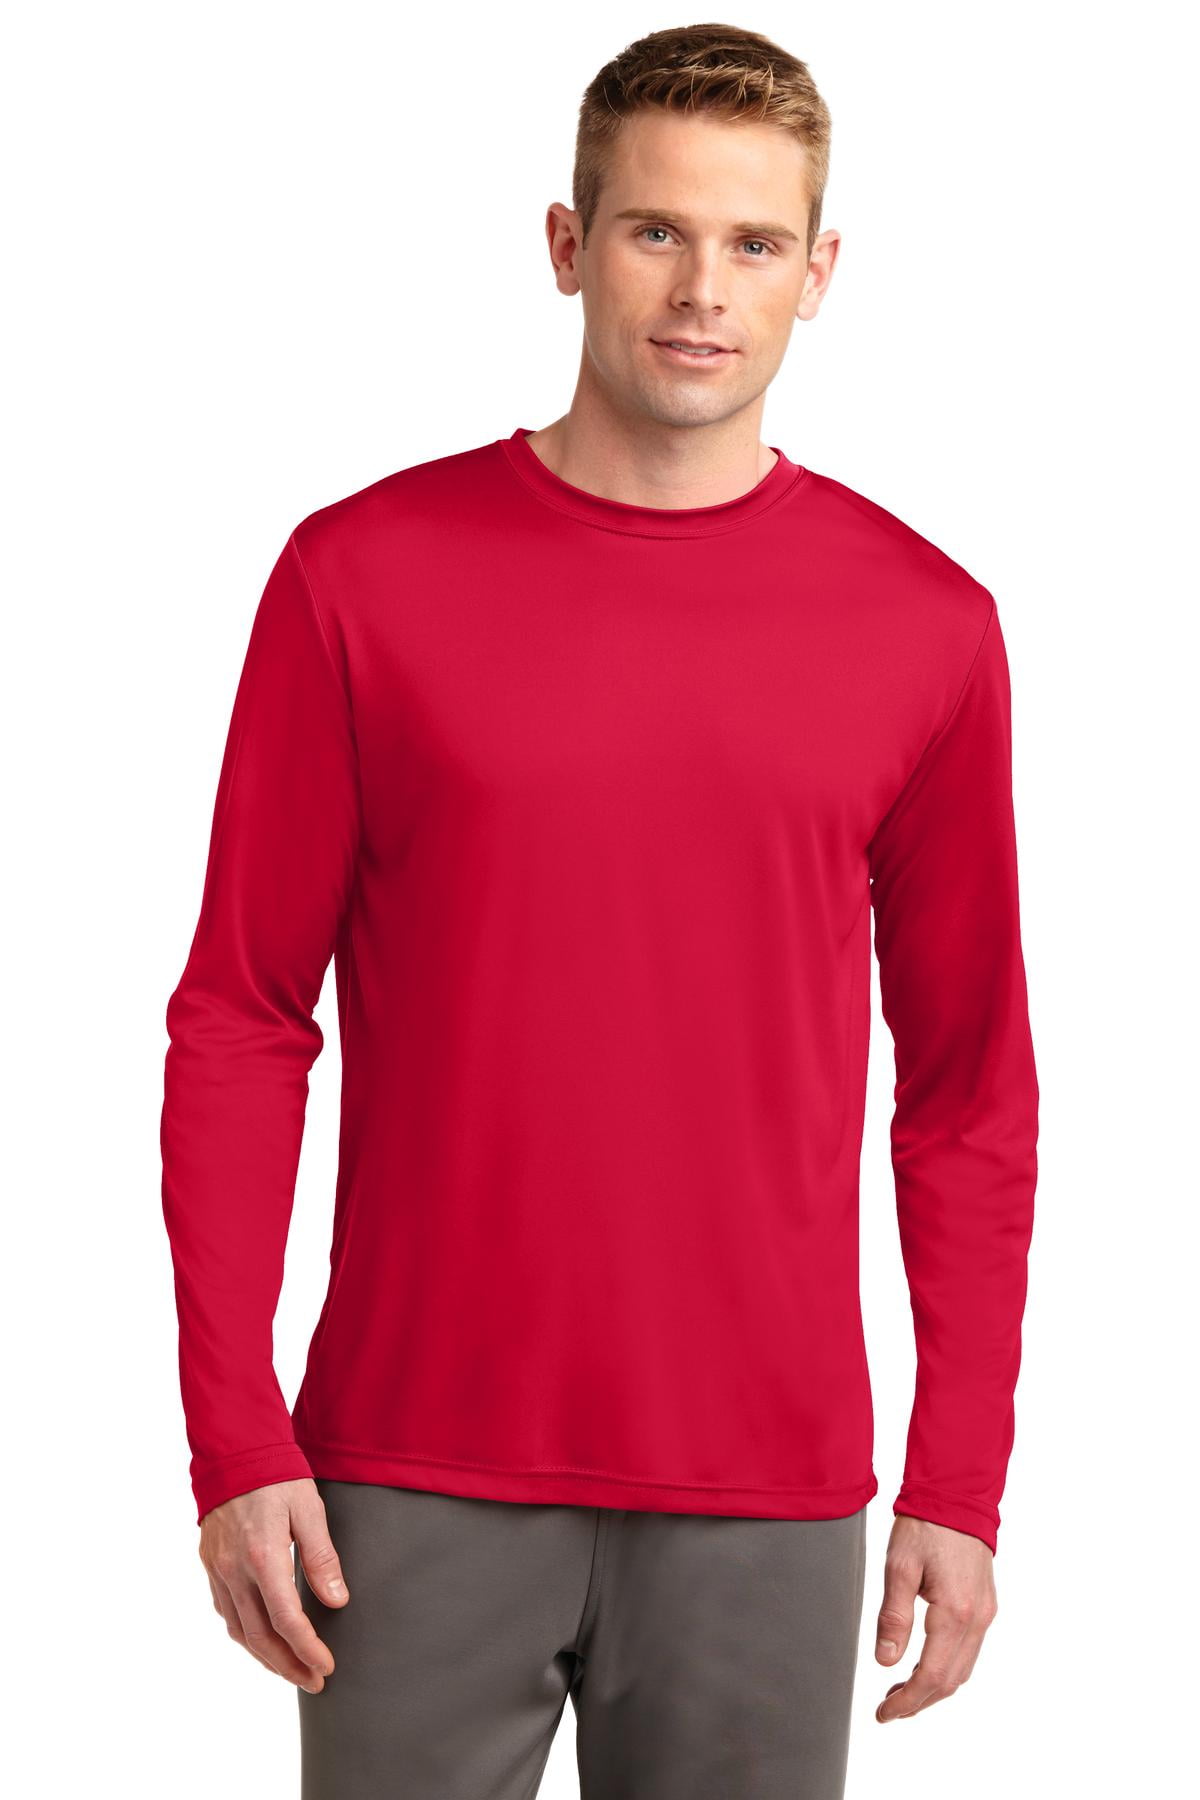 Sport-Tek Tall Long Sleeve PosiCharge Competitor Tee-4XLT (True Red)